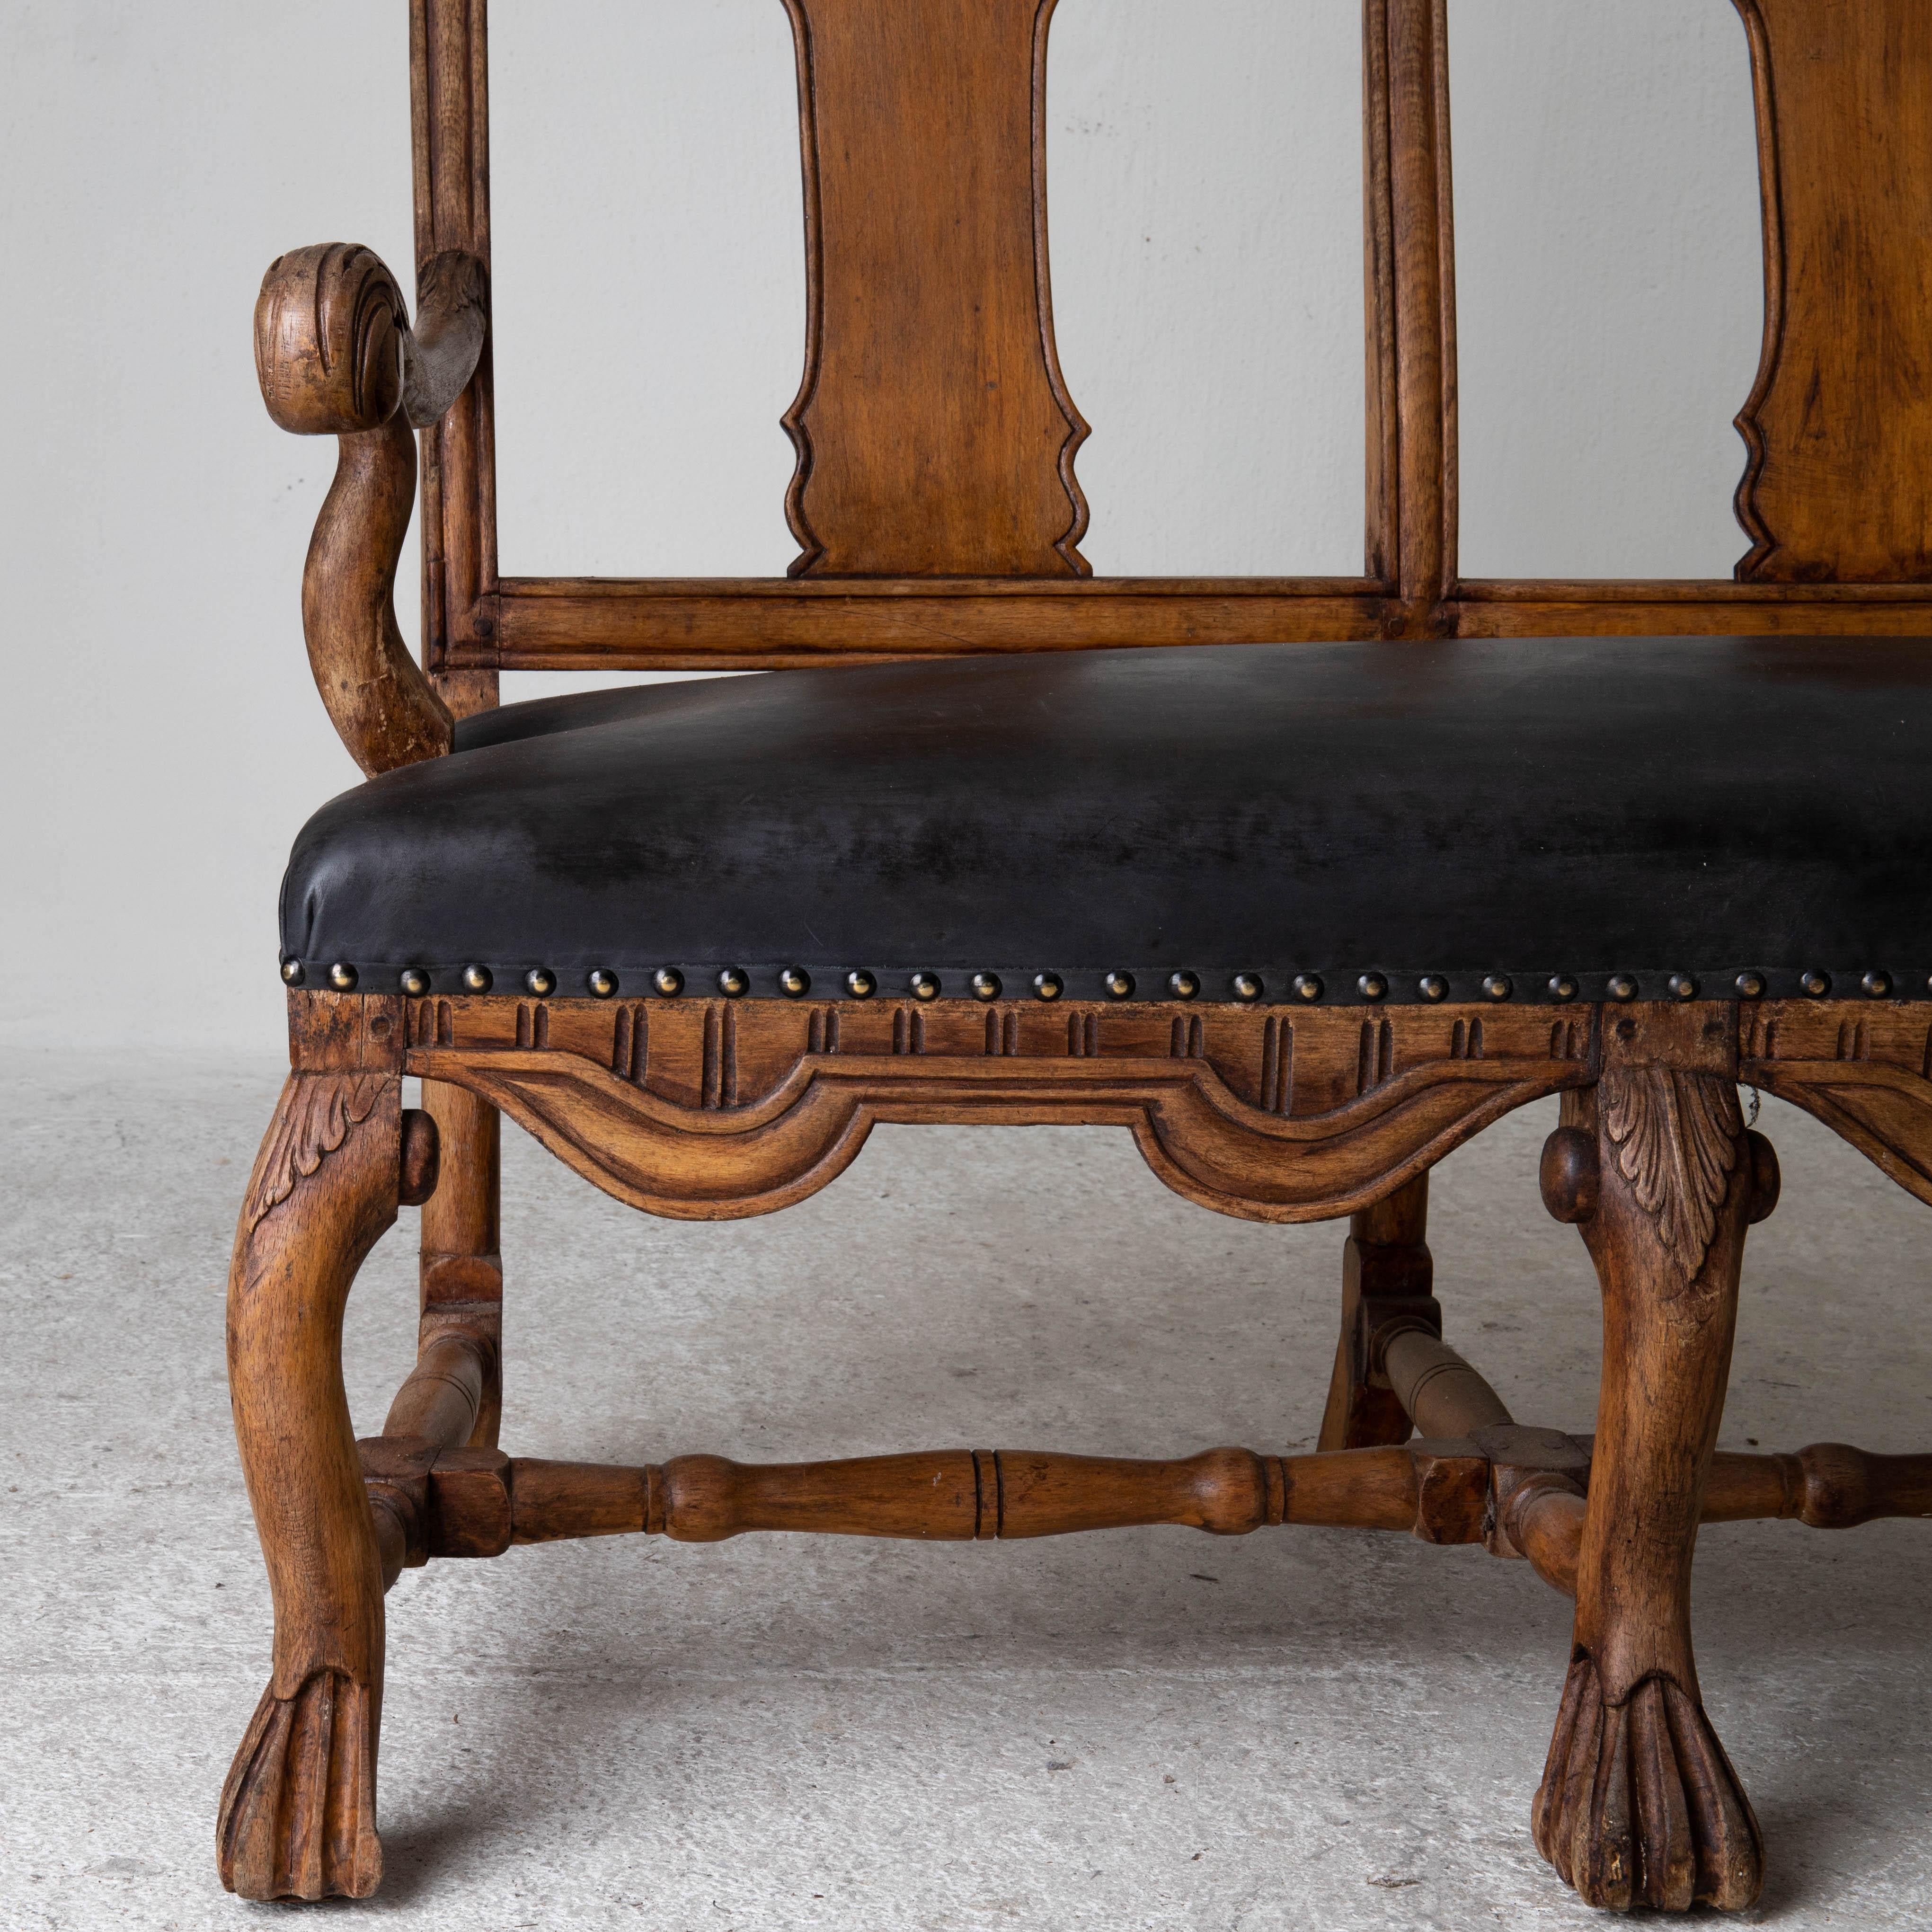 Sofa bench Swedish Baroque Period 1650-1750 brown black, Sweden. A sofa bench made during the Baroque Period 1650-1750 in Sweden / Northern Europe. The seat has been reupholstered in a waxed vintage leather. Finished with brass nail heads.

  